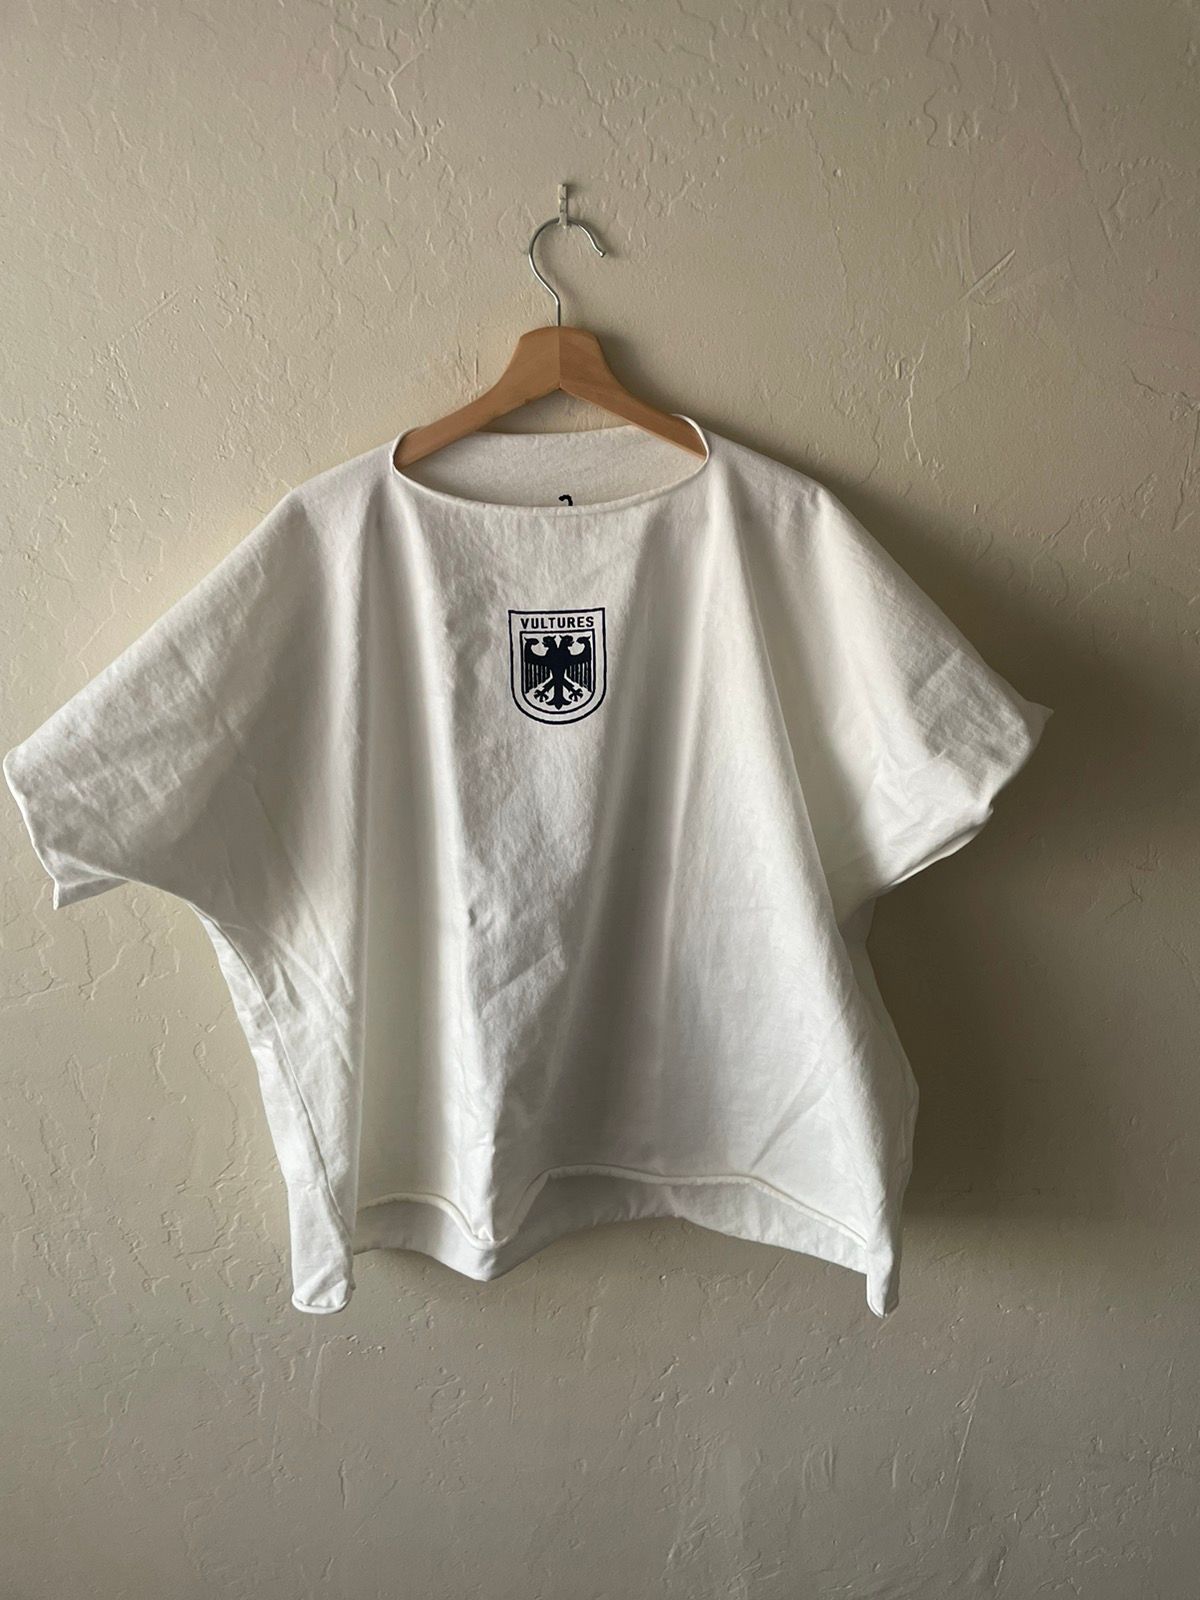 Pre-owned Kanye West X Yeezy Season Kanye Vultures Merch In White